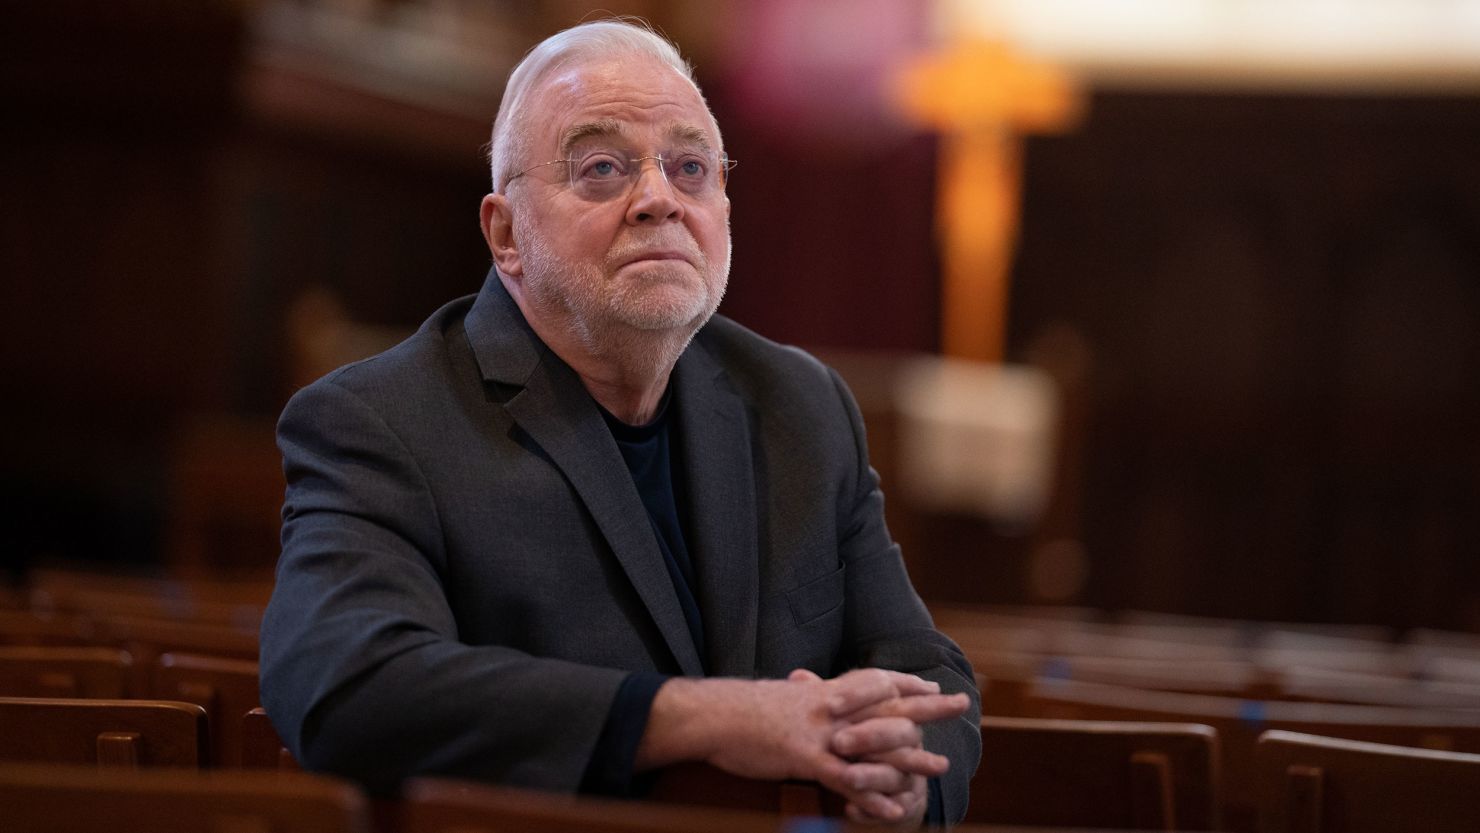 Jim Wallis, an evangelical leader and author of "The False White Gospel," says White Christian nationalism is not new but a heretical form of faith that has been in the US since its founding.